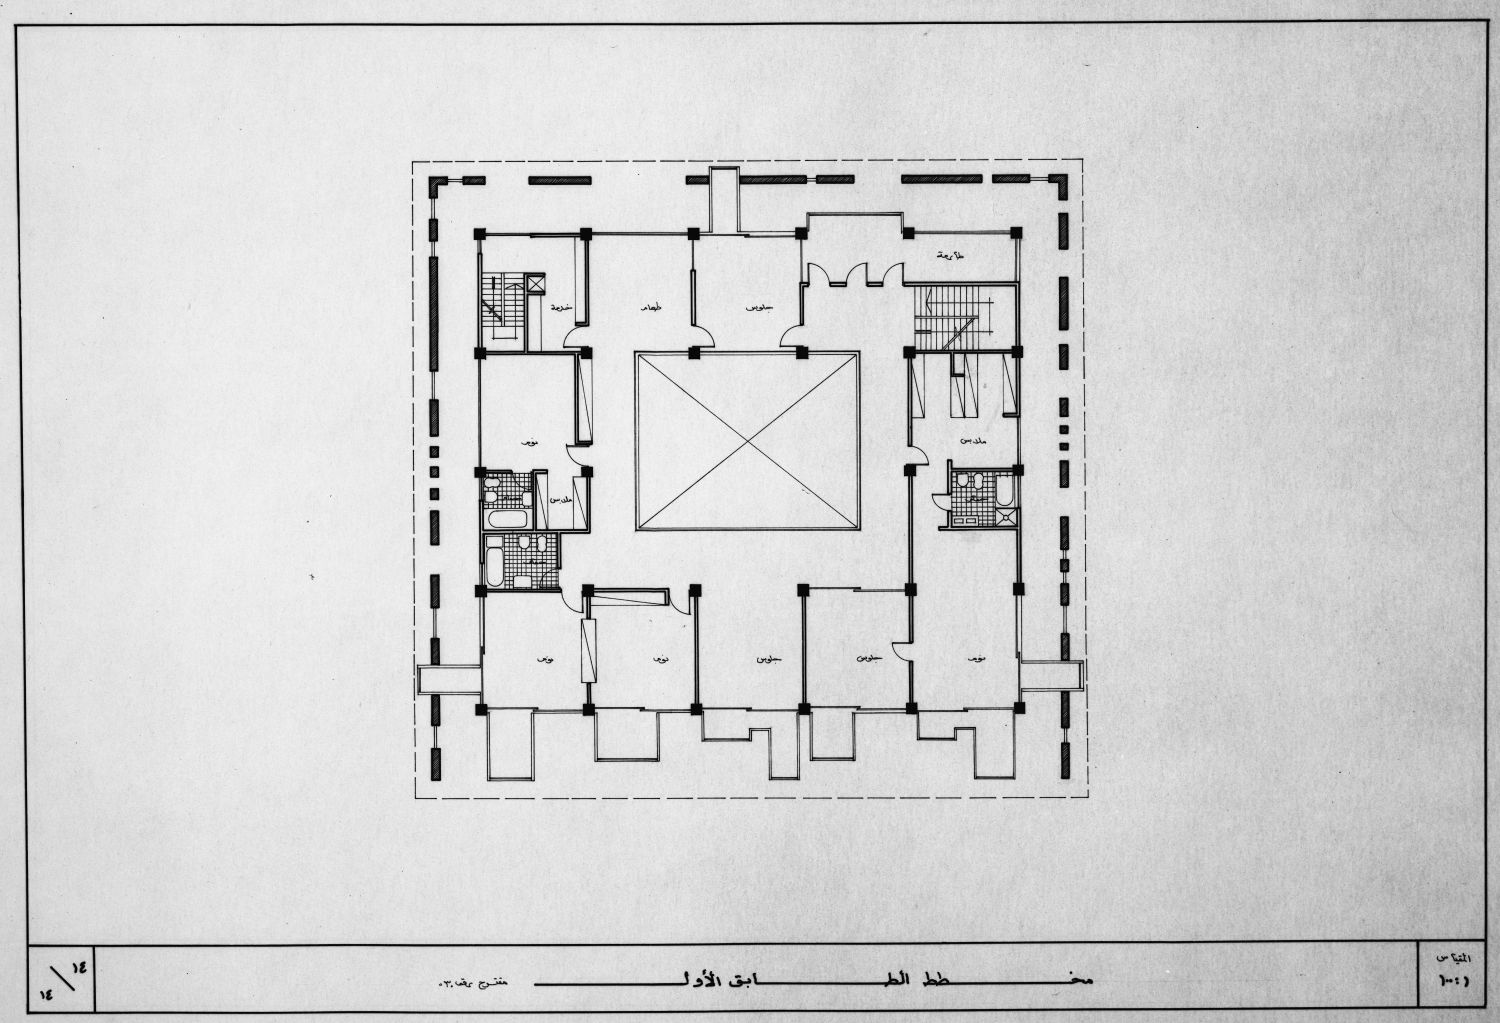 First floor plan (alternate version not used in final construction).